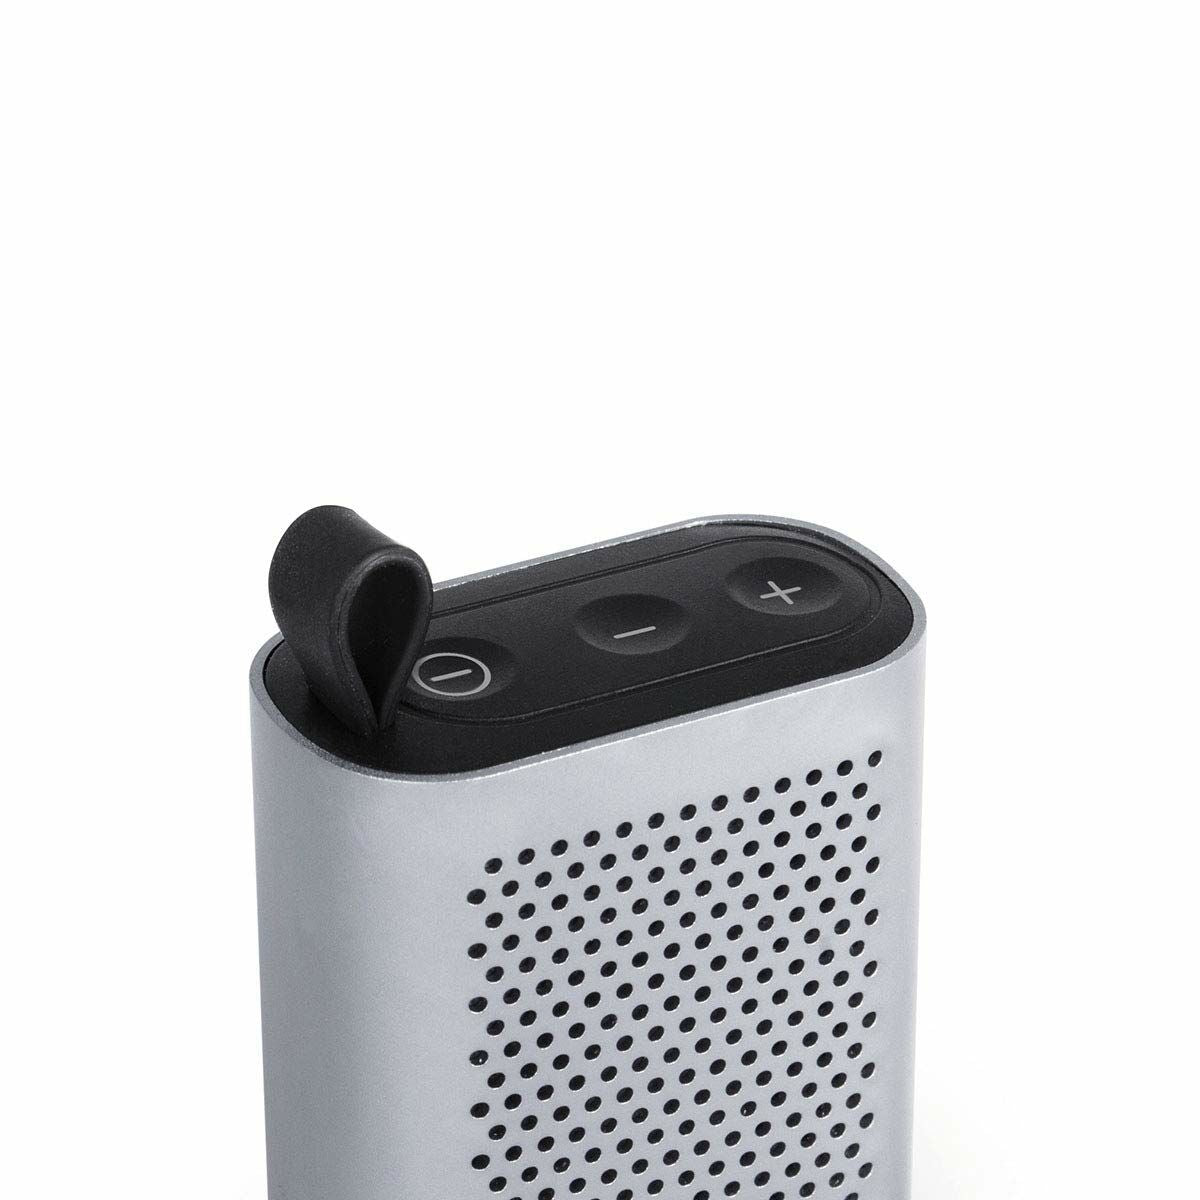 Bluetooth Speakers Schneider USB 450 mAh 2W, Schneider, Electronics, Mobile communication and accessories, bluetooth-speakers-schneider-usb-450-mah-2w-1, Brand_Schneider, category-reference-2609, category-reference-2662, category-reference-2671, category-reference-2882, category-reference-2923, category-reference-t-19653, category-reference-t-21311, category-reference-t-4036, category-reference-t-4037, Condition_NEW, entertainment, music, Price_20 - 50, telephones & tablets, wifi y bluetooth, RiotNook